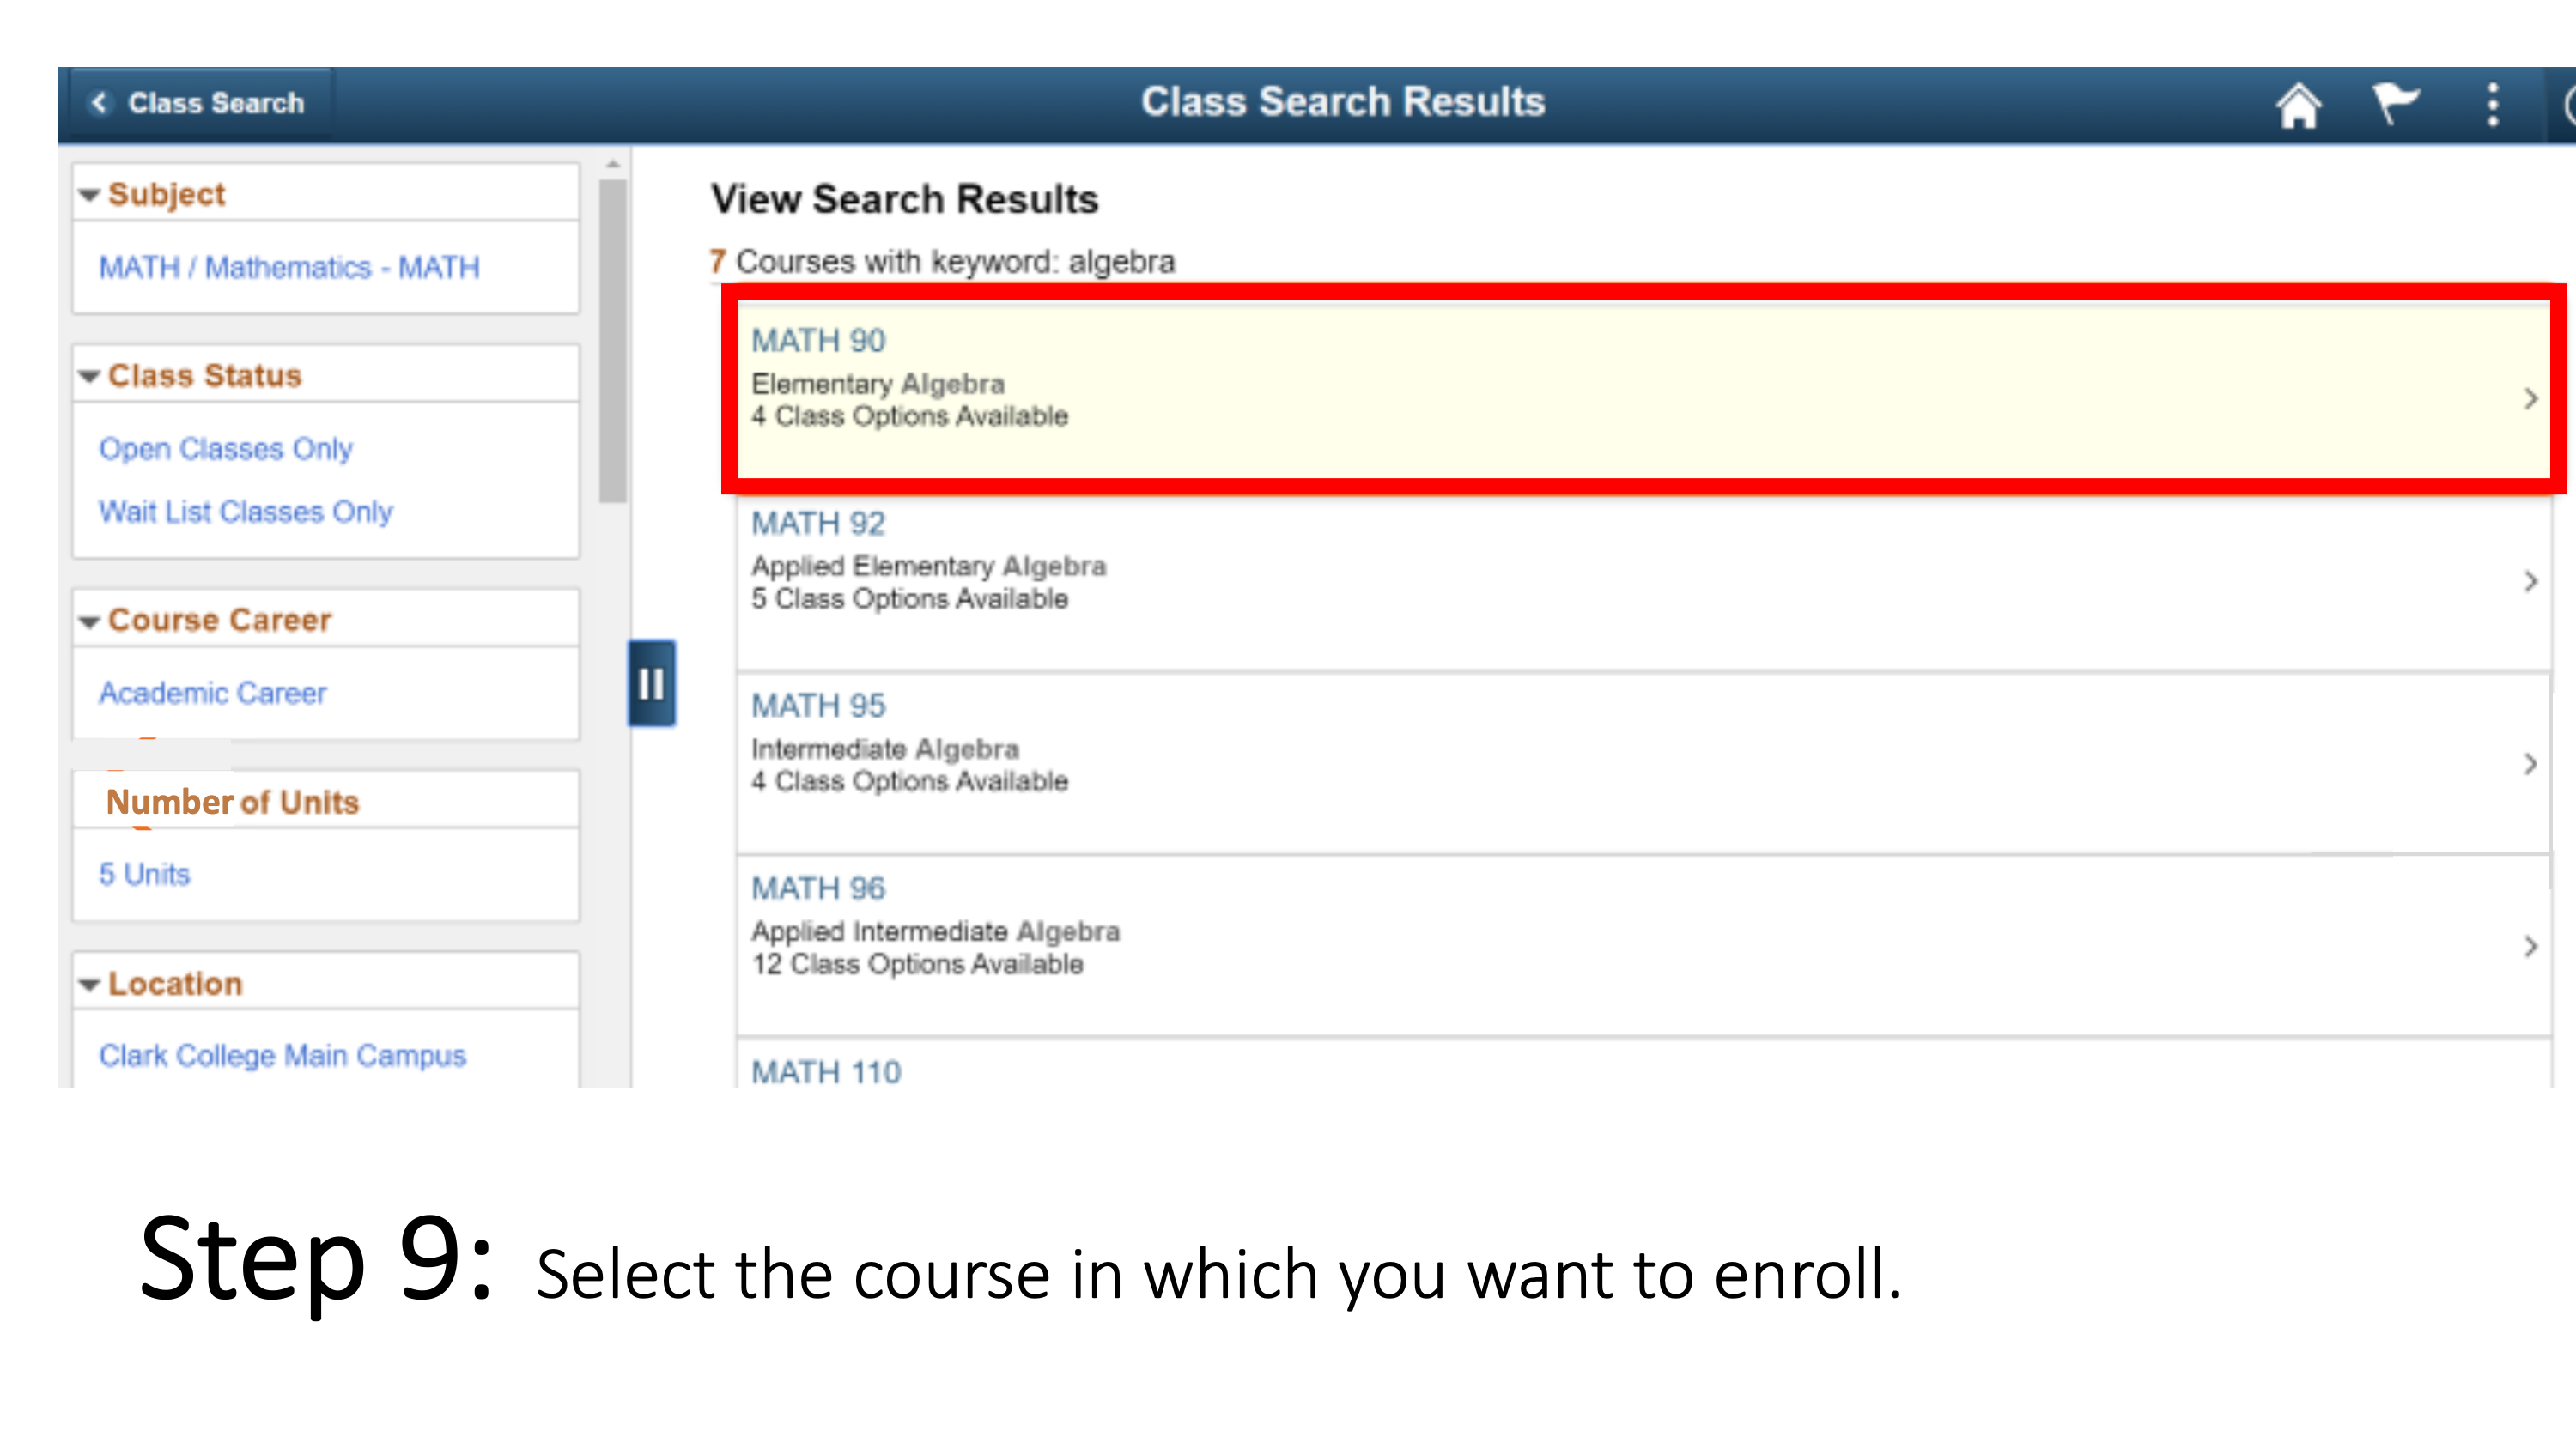 Select the course in which you want to enroll.